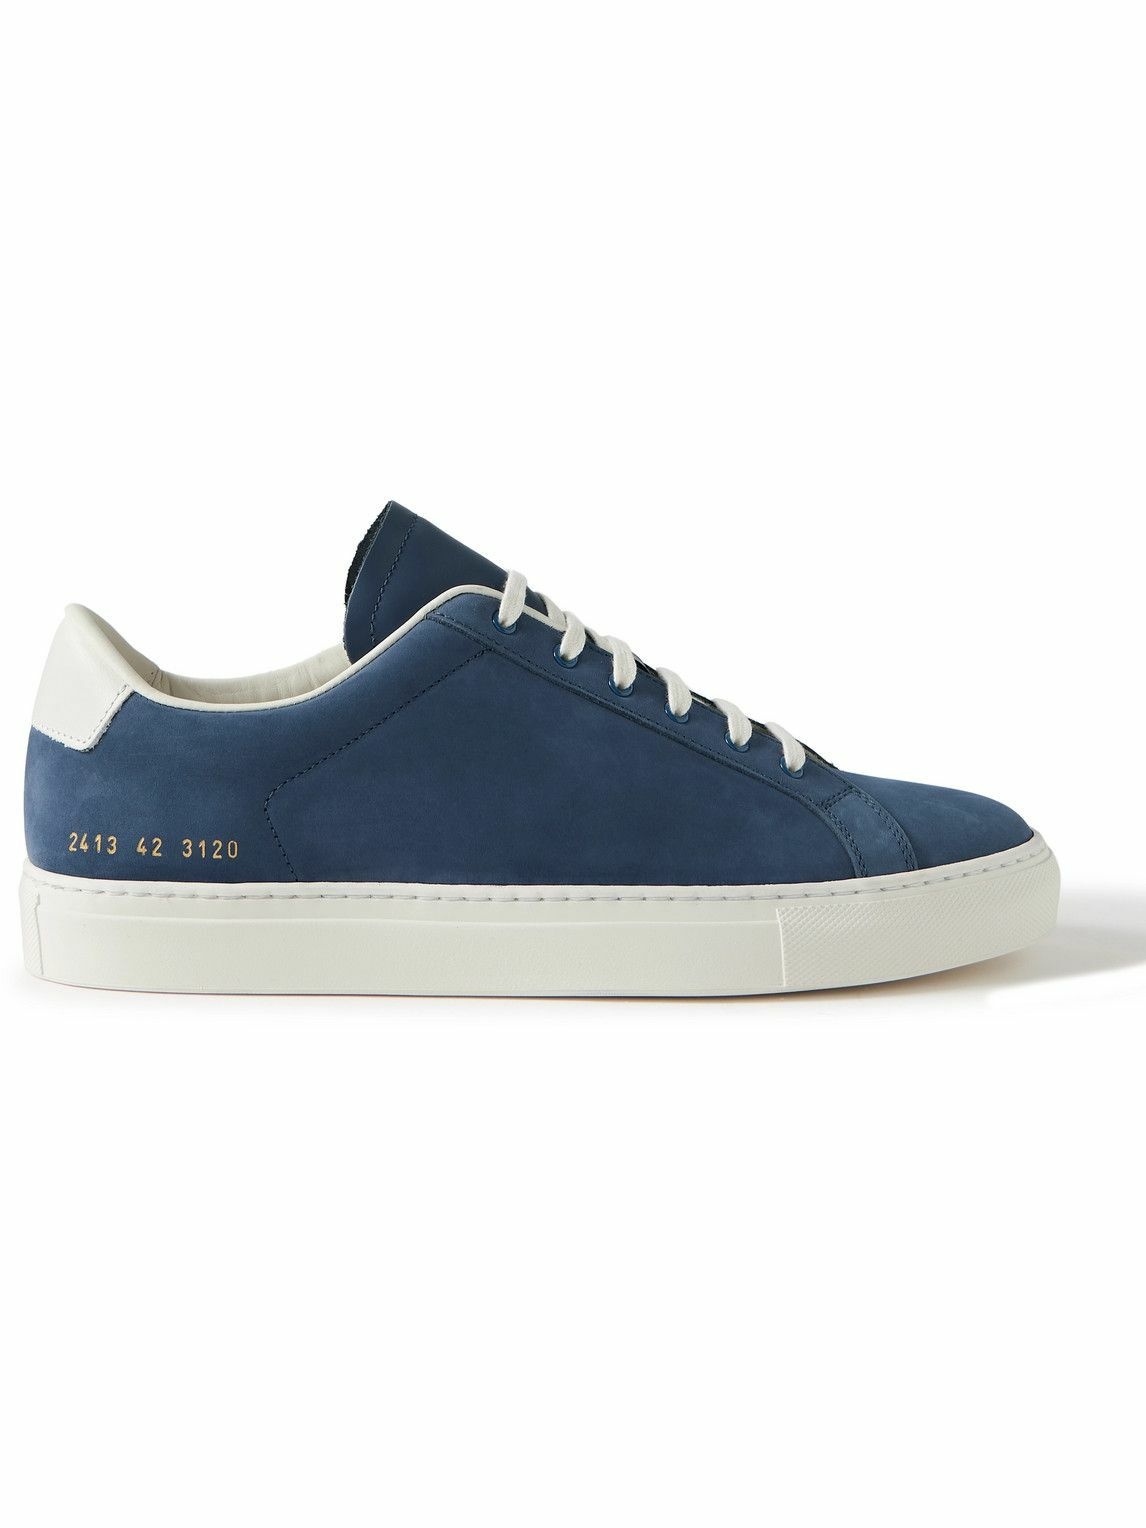 Common Projects - Retro Leather-Trimmed Nubuck Sneakers - Blue Common ...